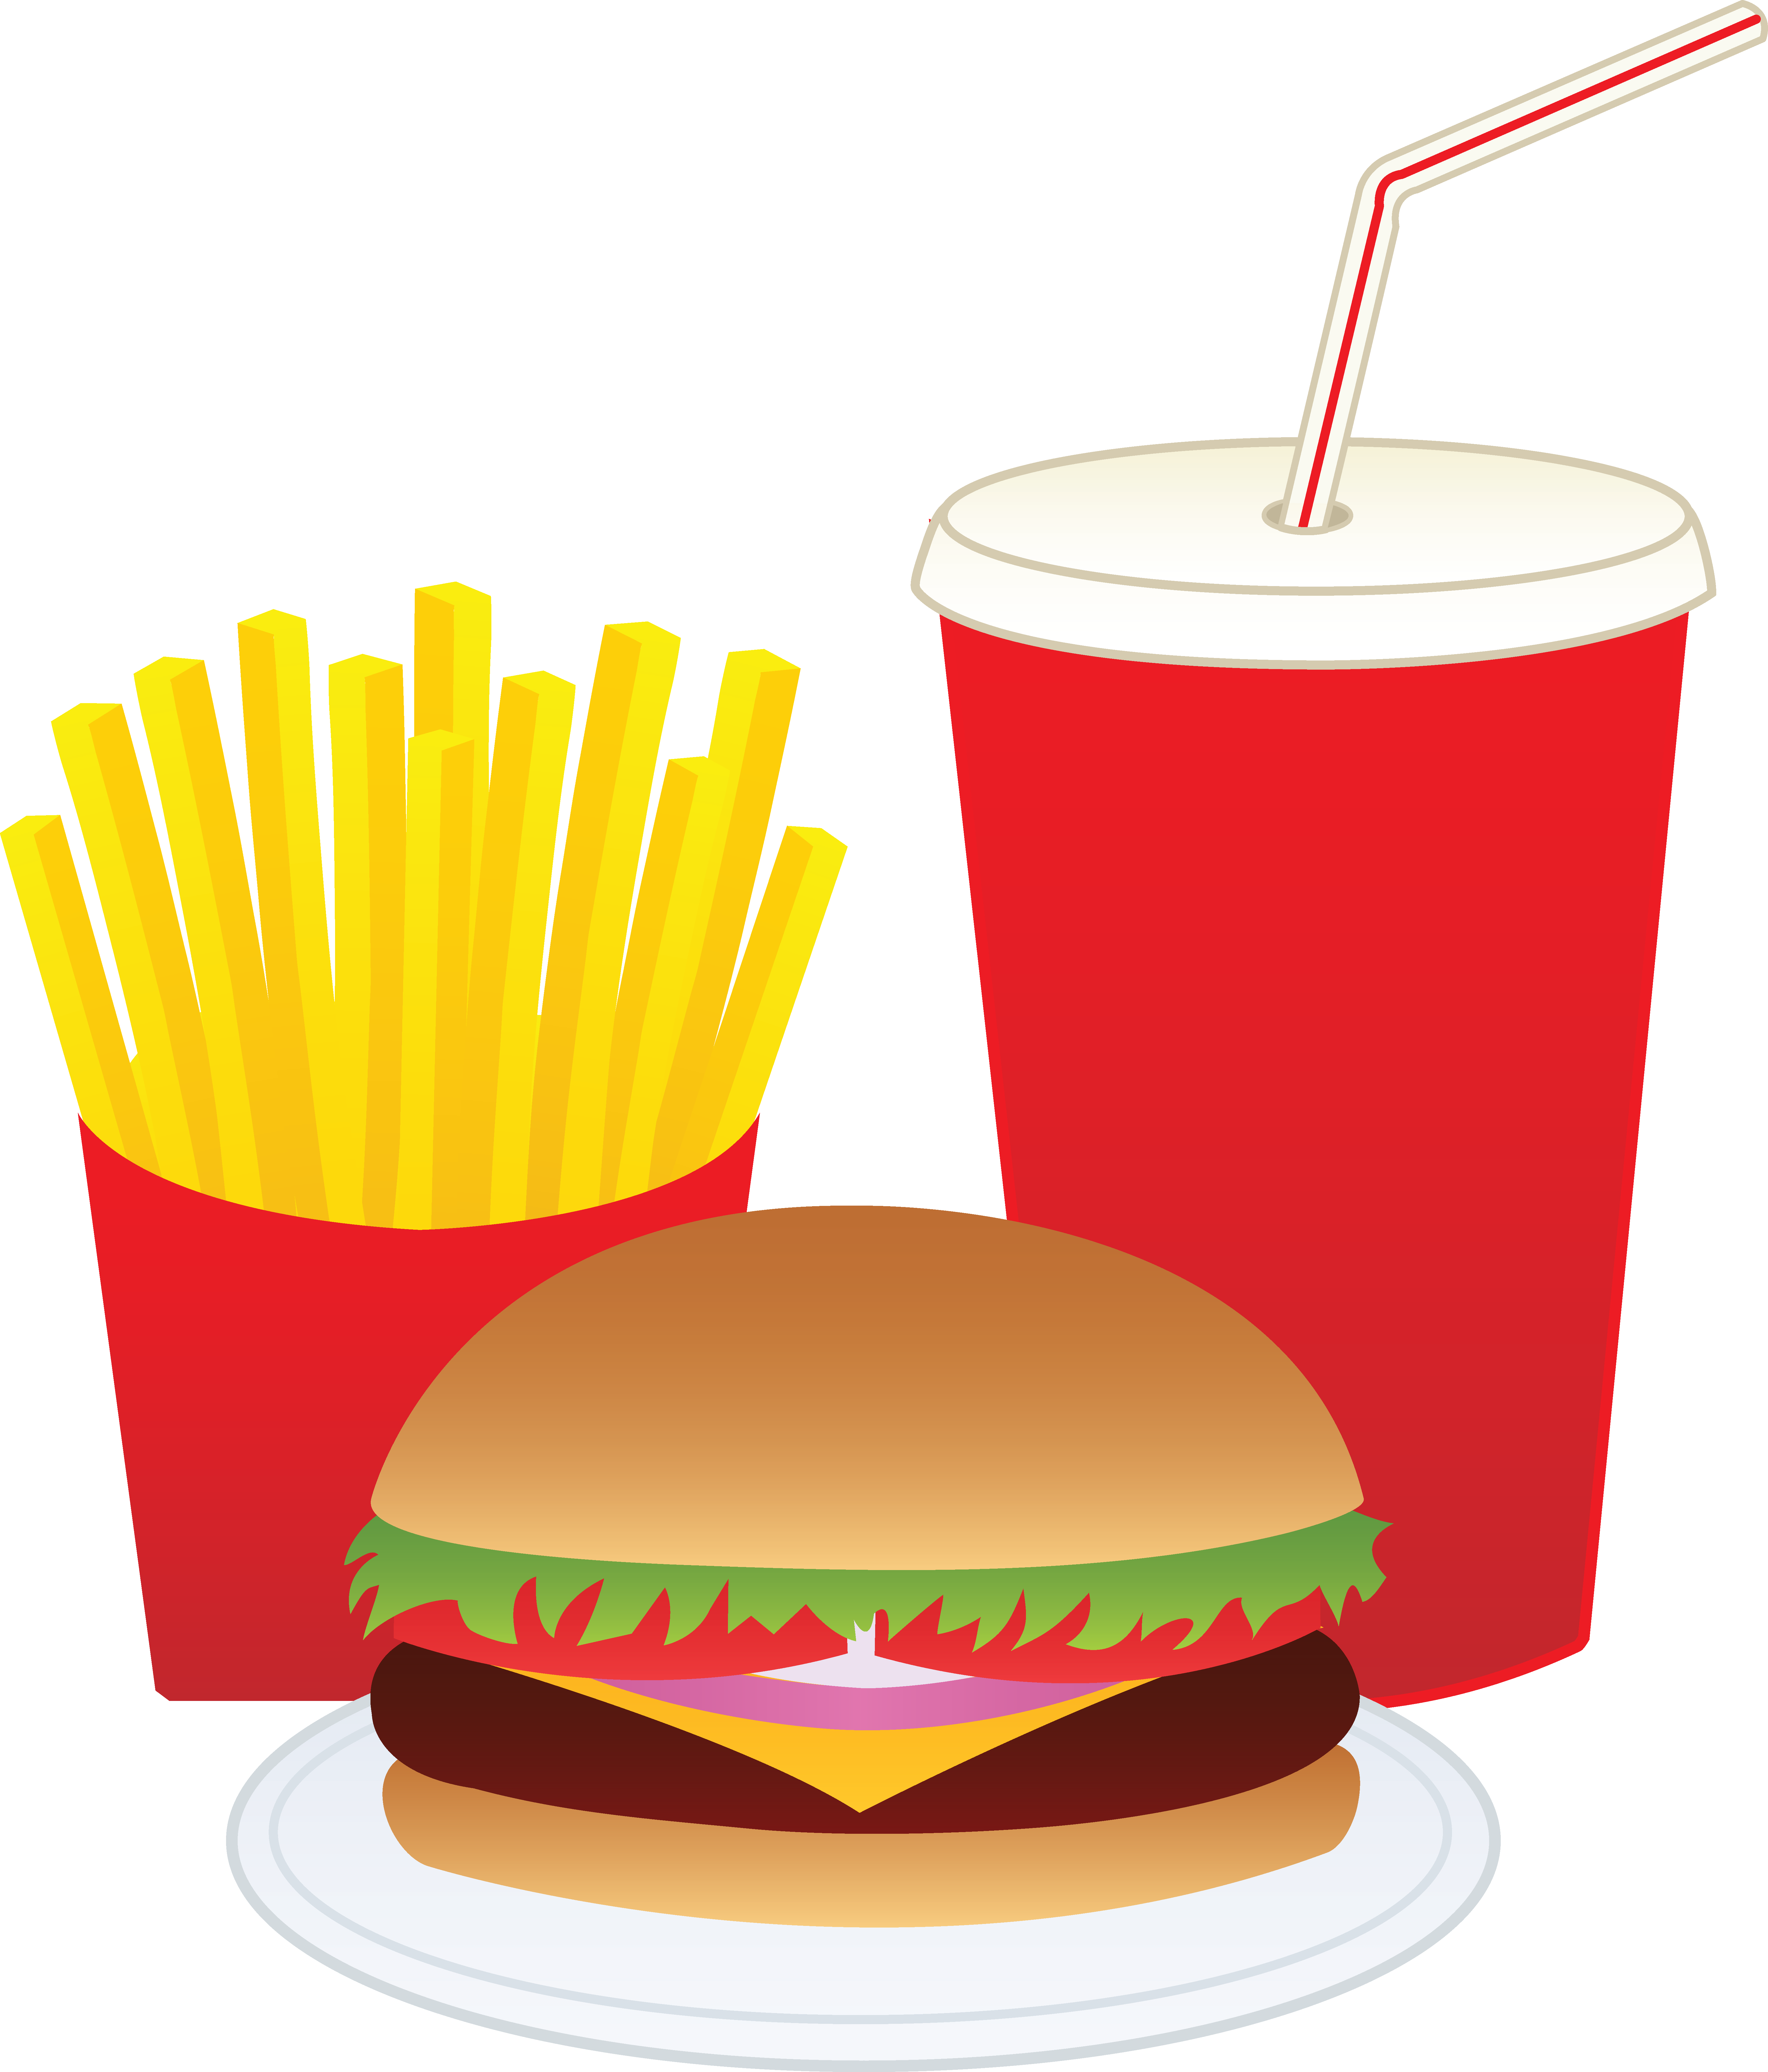 Free Burger Meal Cliparts, Download Free Clip Art, Free Clip.